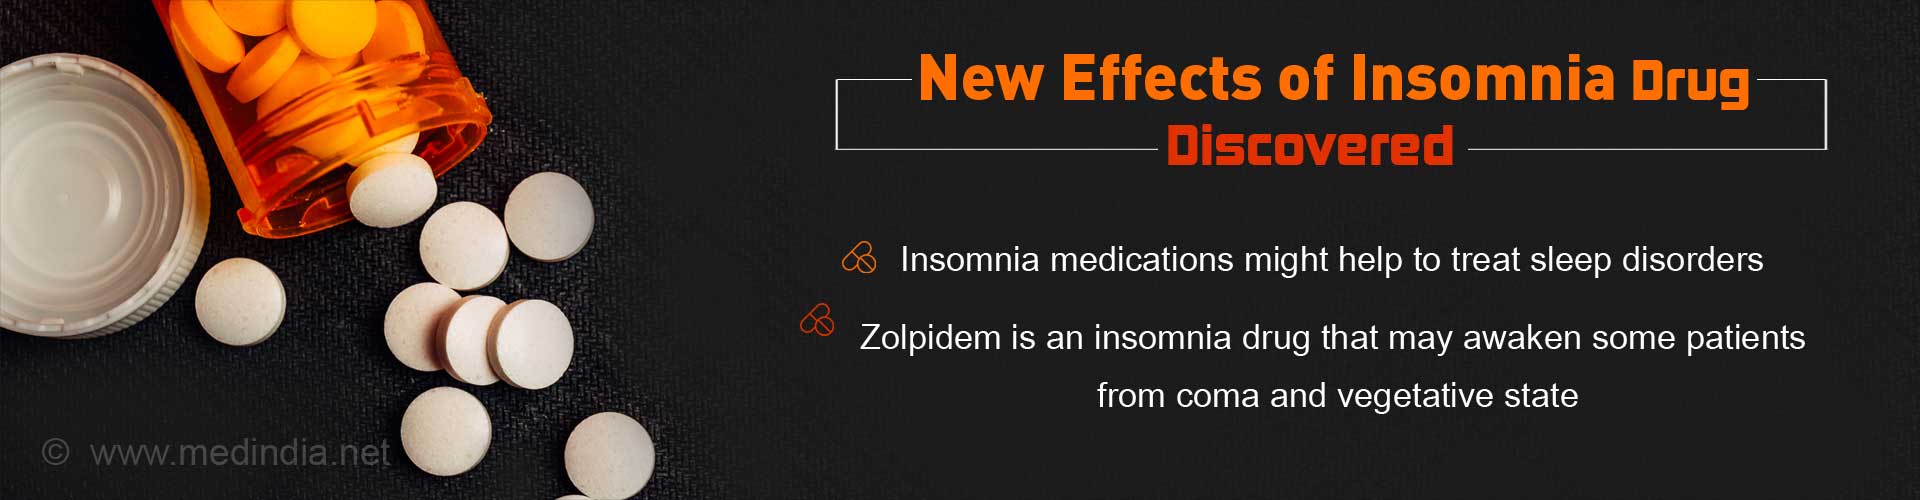 New Effects of Insomnia Drug Discovered
- Insomnia medications might help to treat sleep disorders
- Zolpidem is an insomnia drug that may awaken some patients from coma and vegetable state